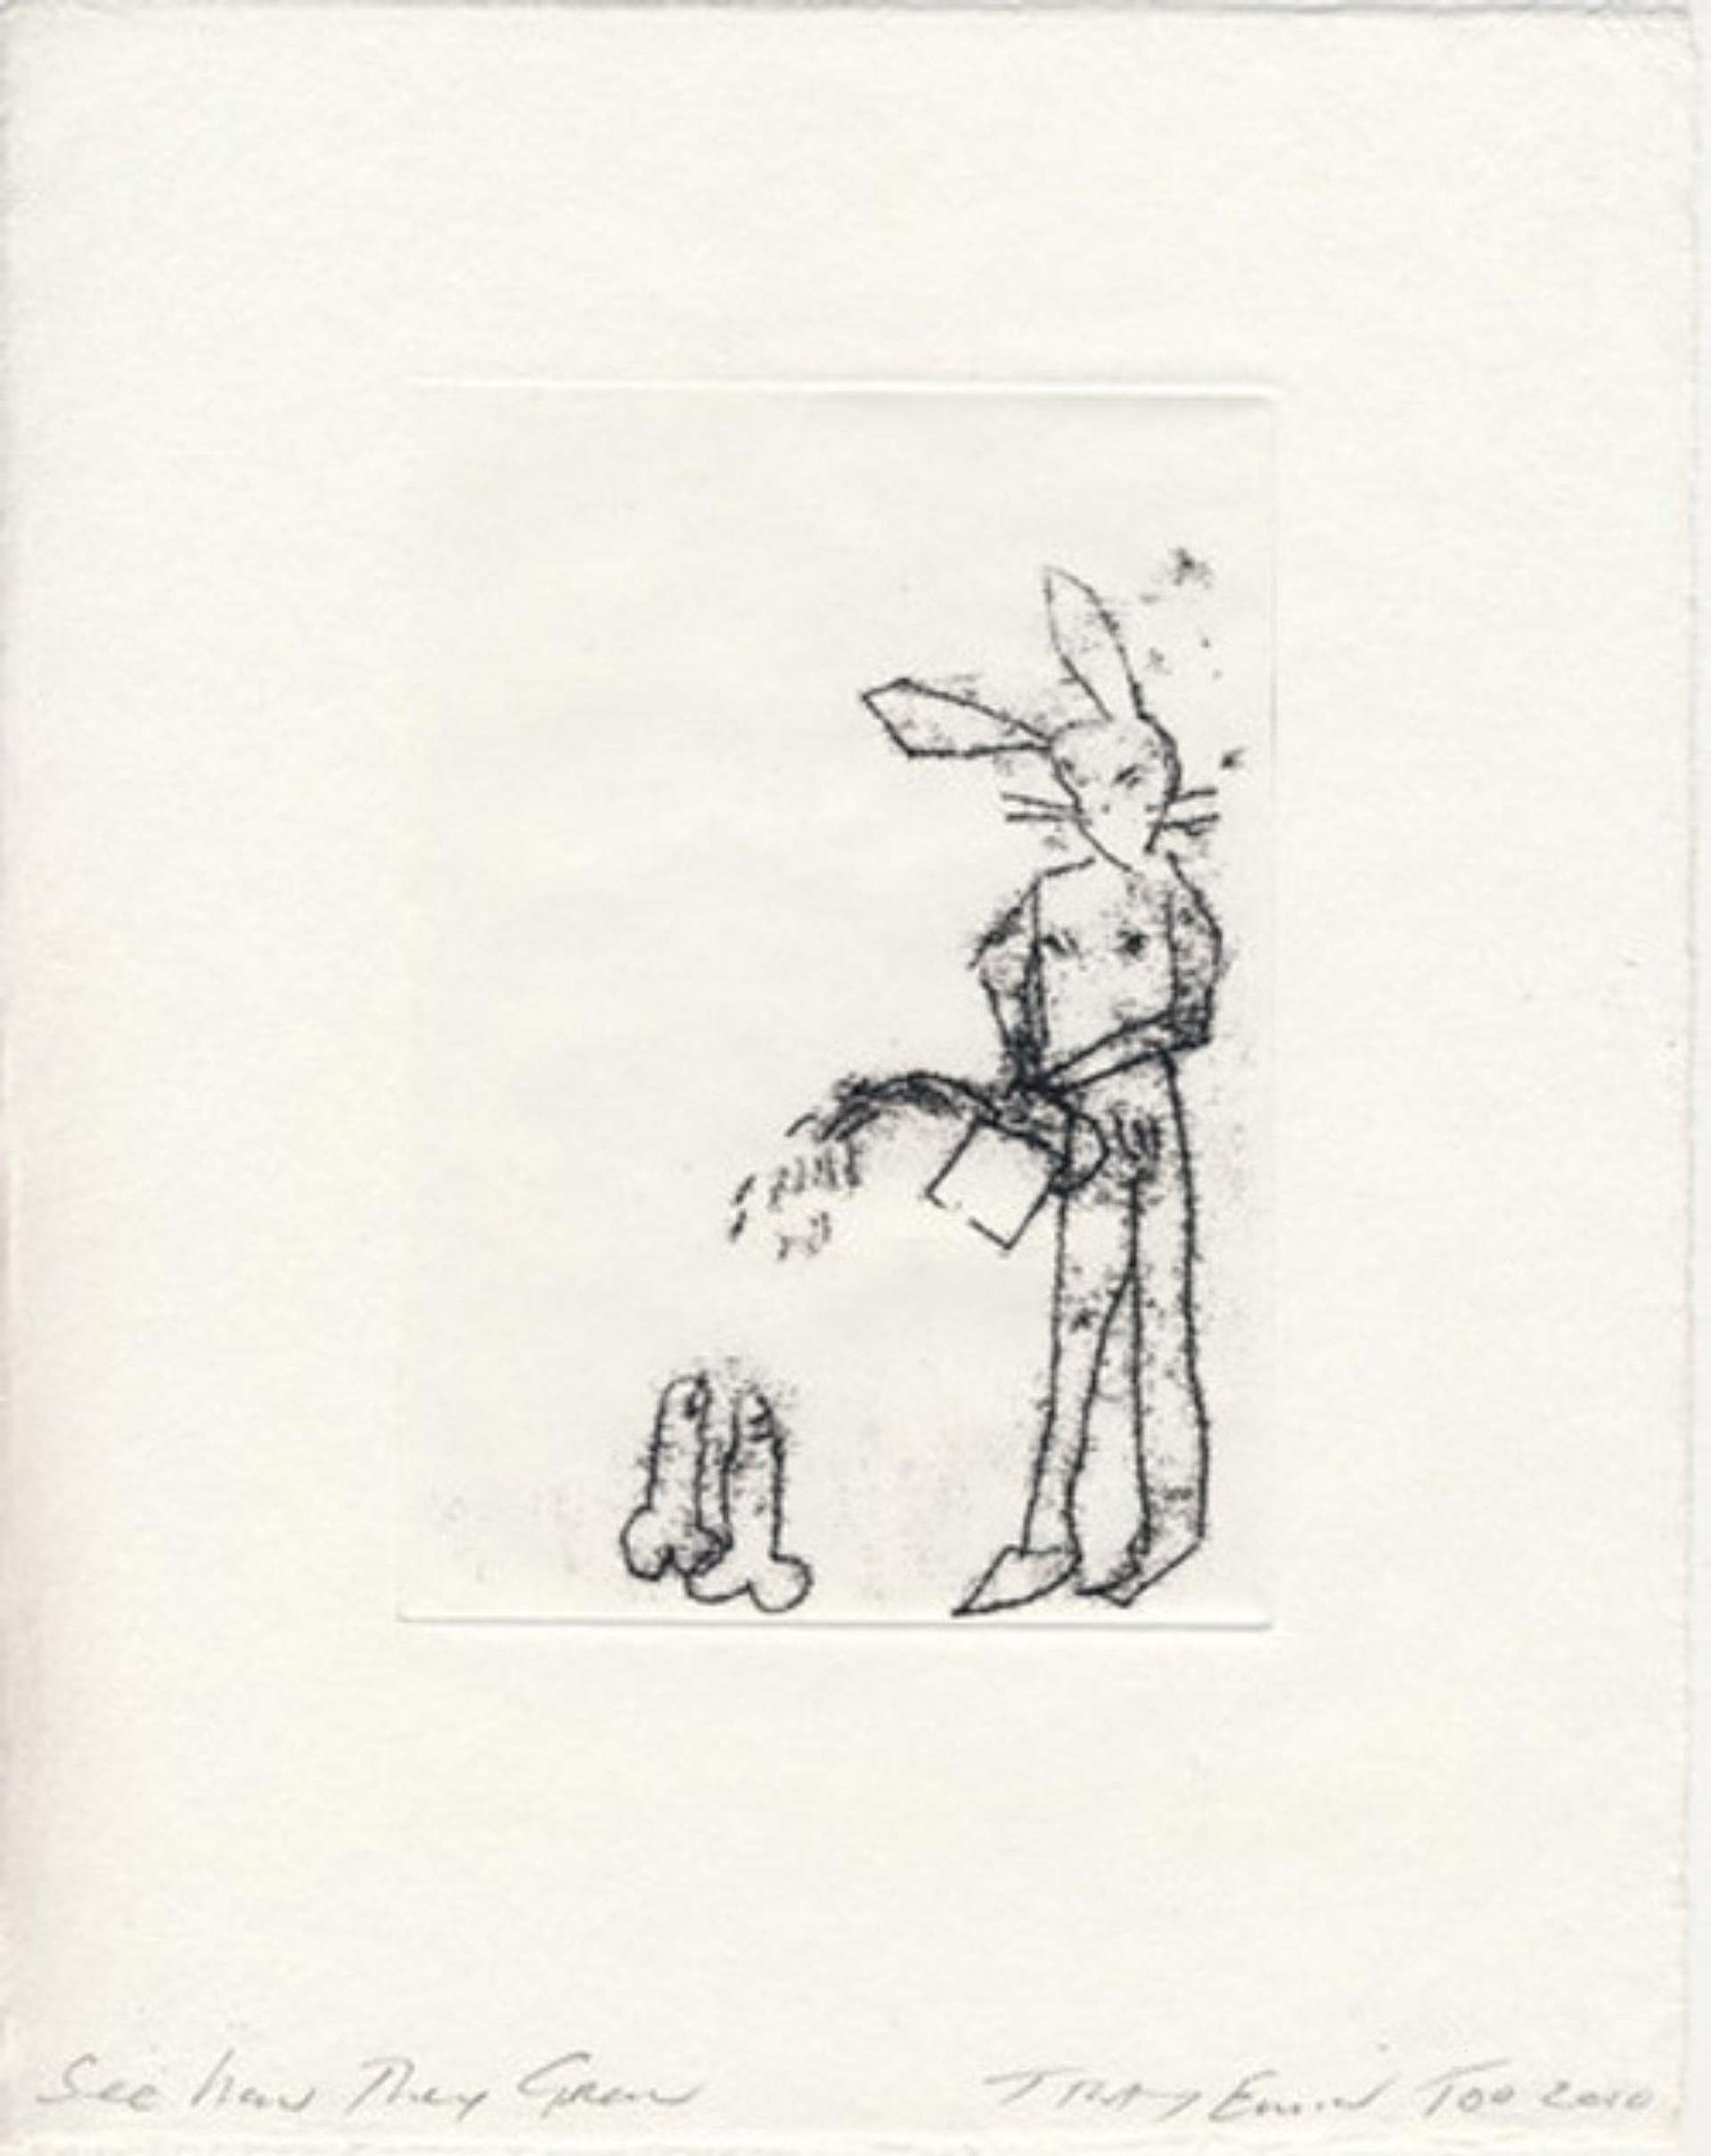 Tracey Emin: See How They Grow - Signed Print